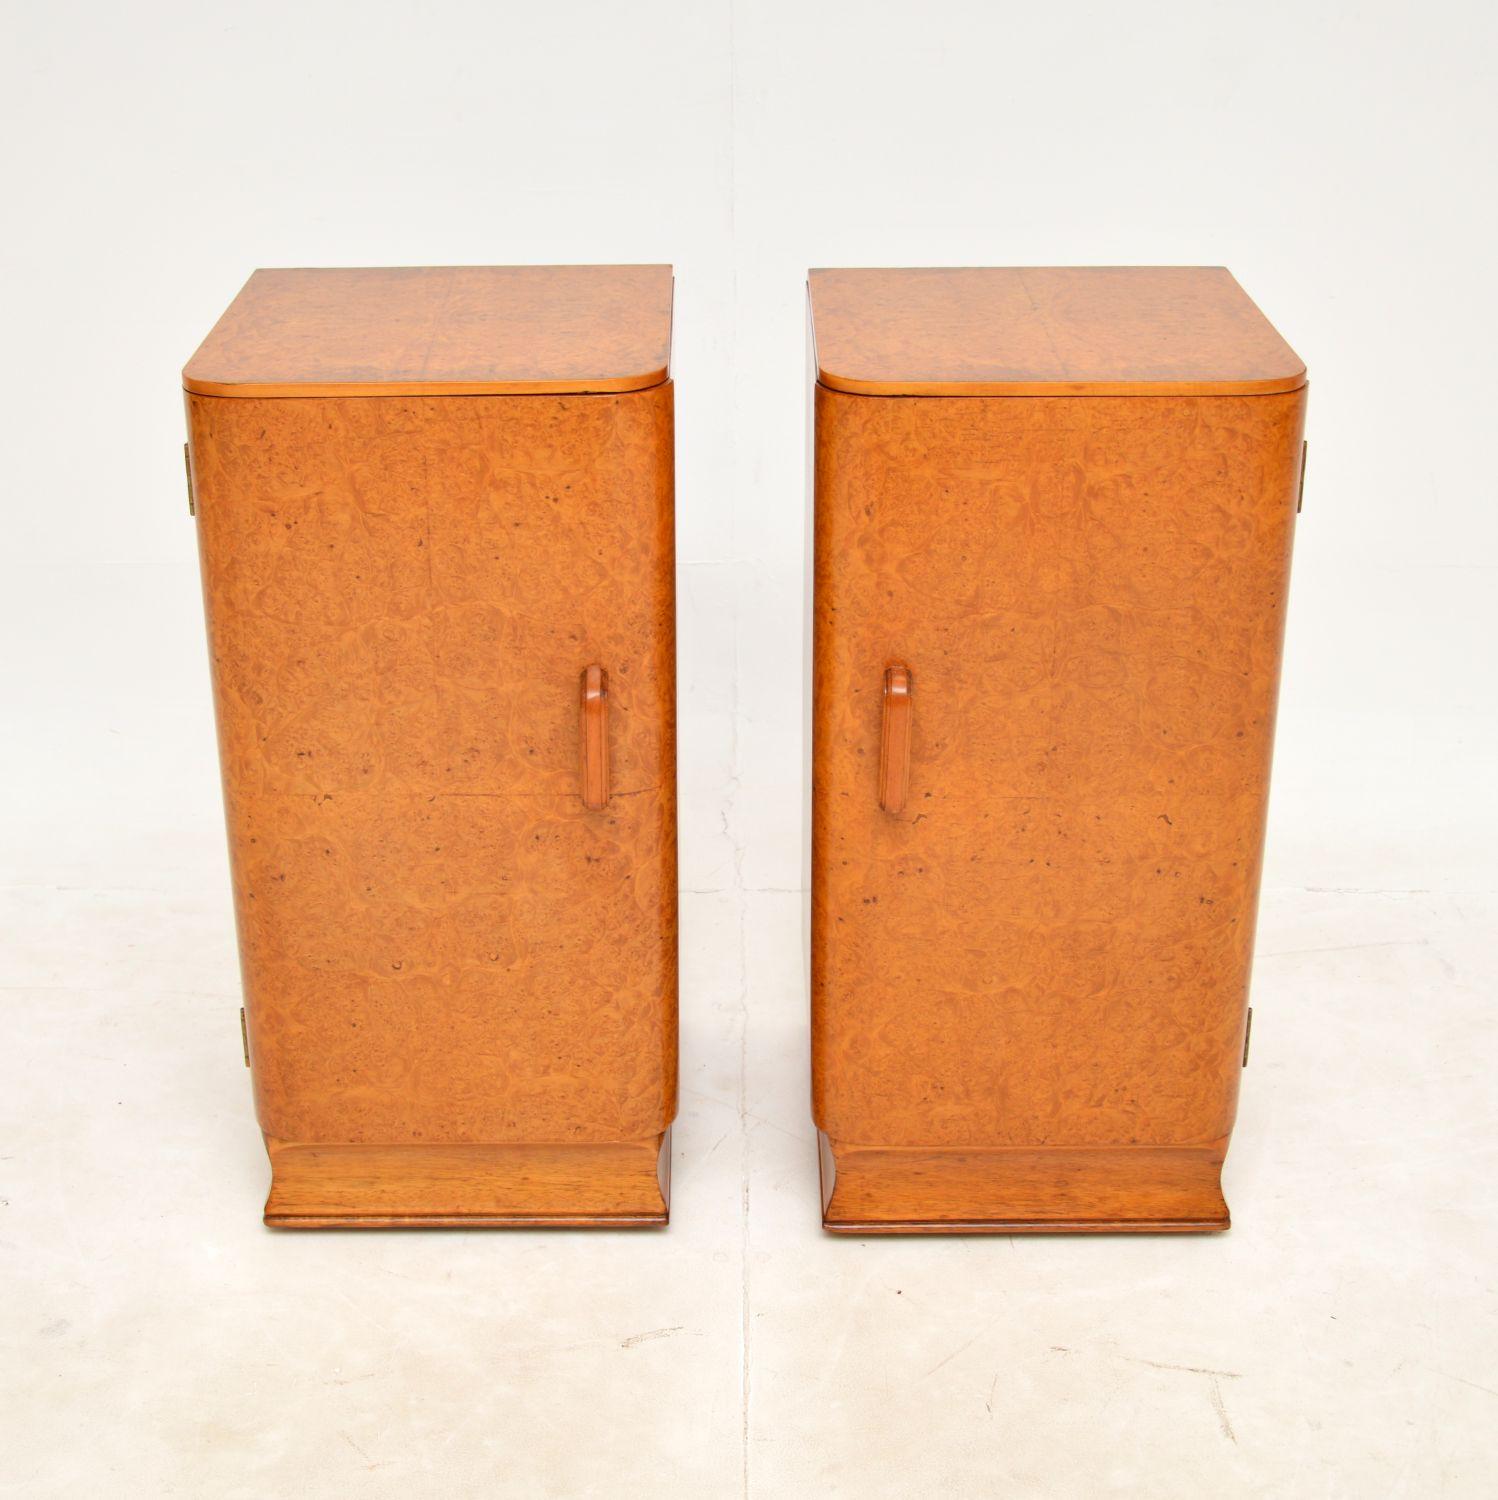 A stunning pair of original Art Deco period bedside cabinets in birds eye maple. They were made in England, they date from the 1930s.

They are of excellent quality and are a vert useful size. The birds eye maple has a gorgeous colour tone and